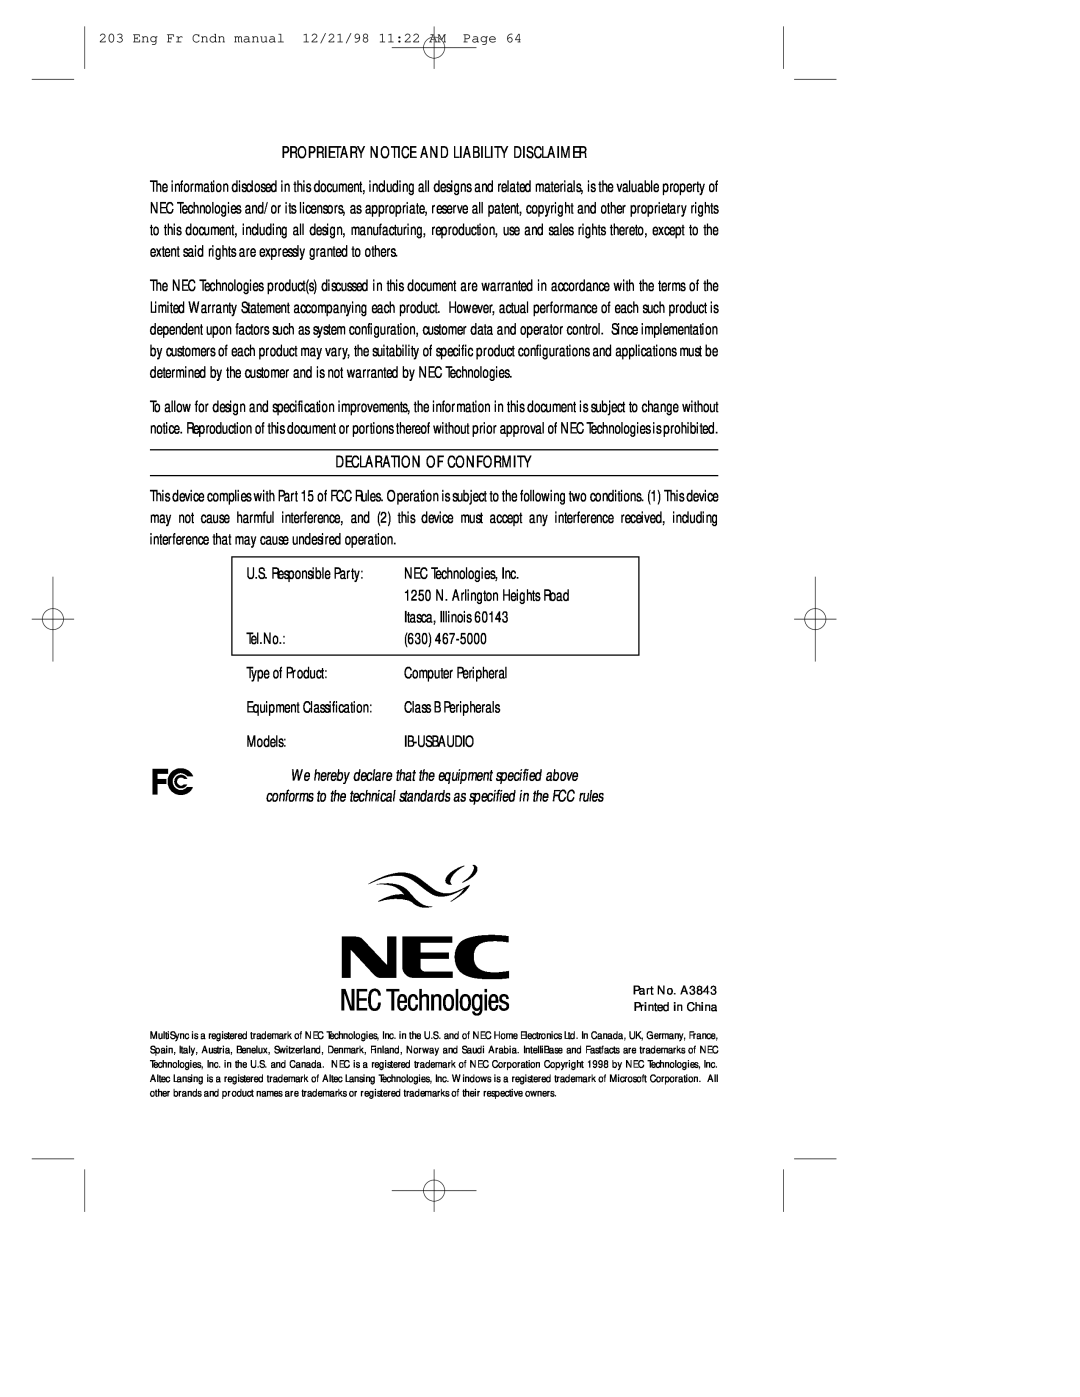 NEC USB user manual Proprietary Notice And Liability Disclaimer, Declaration Of Conformity 